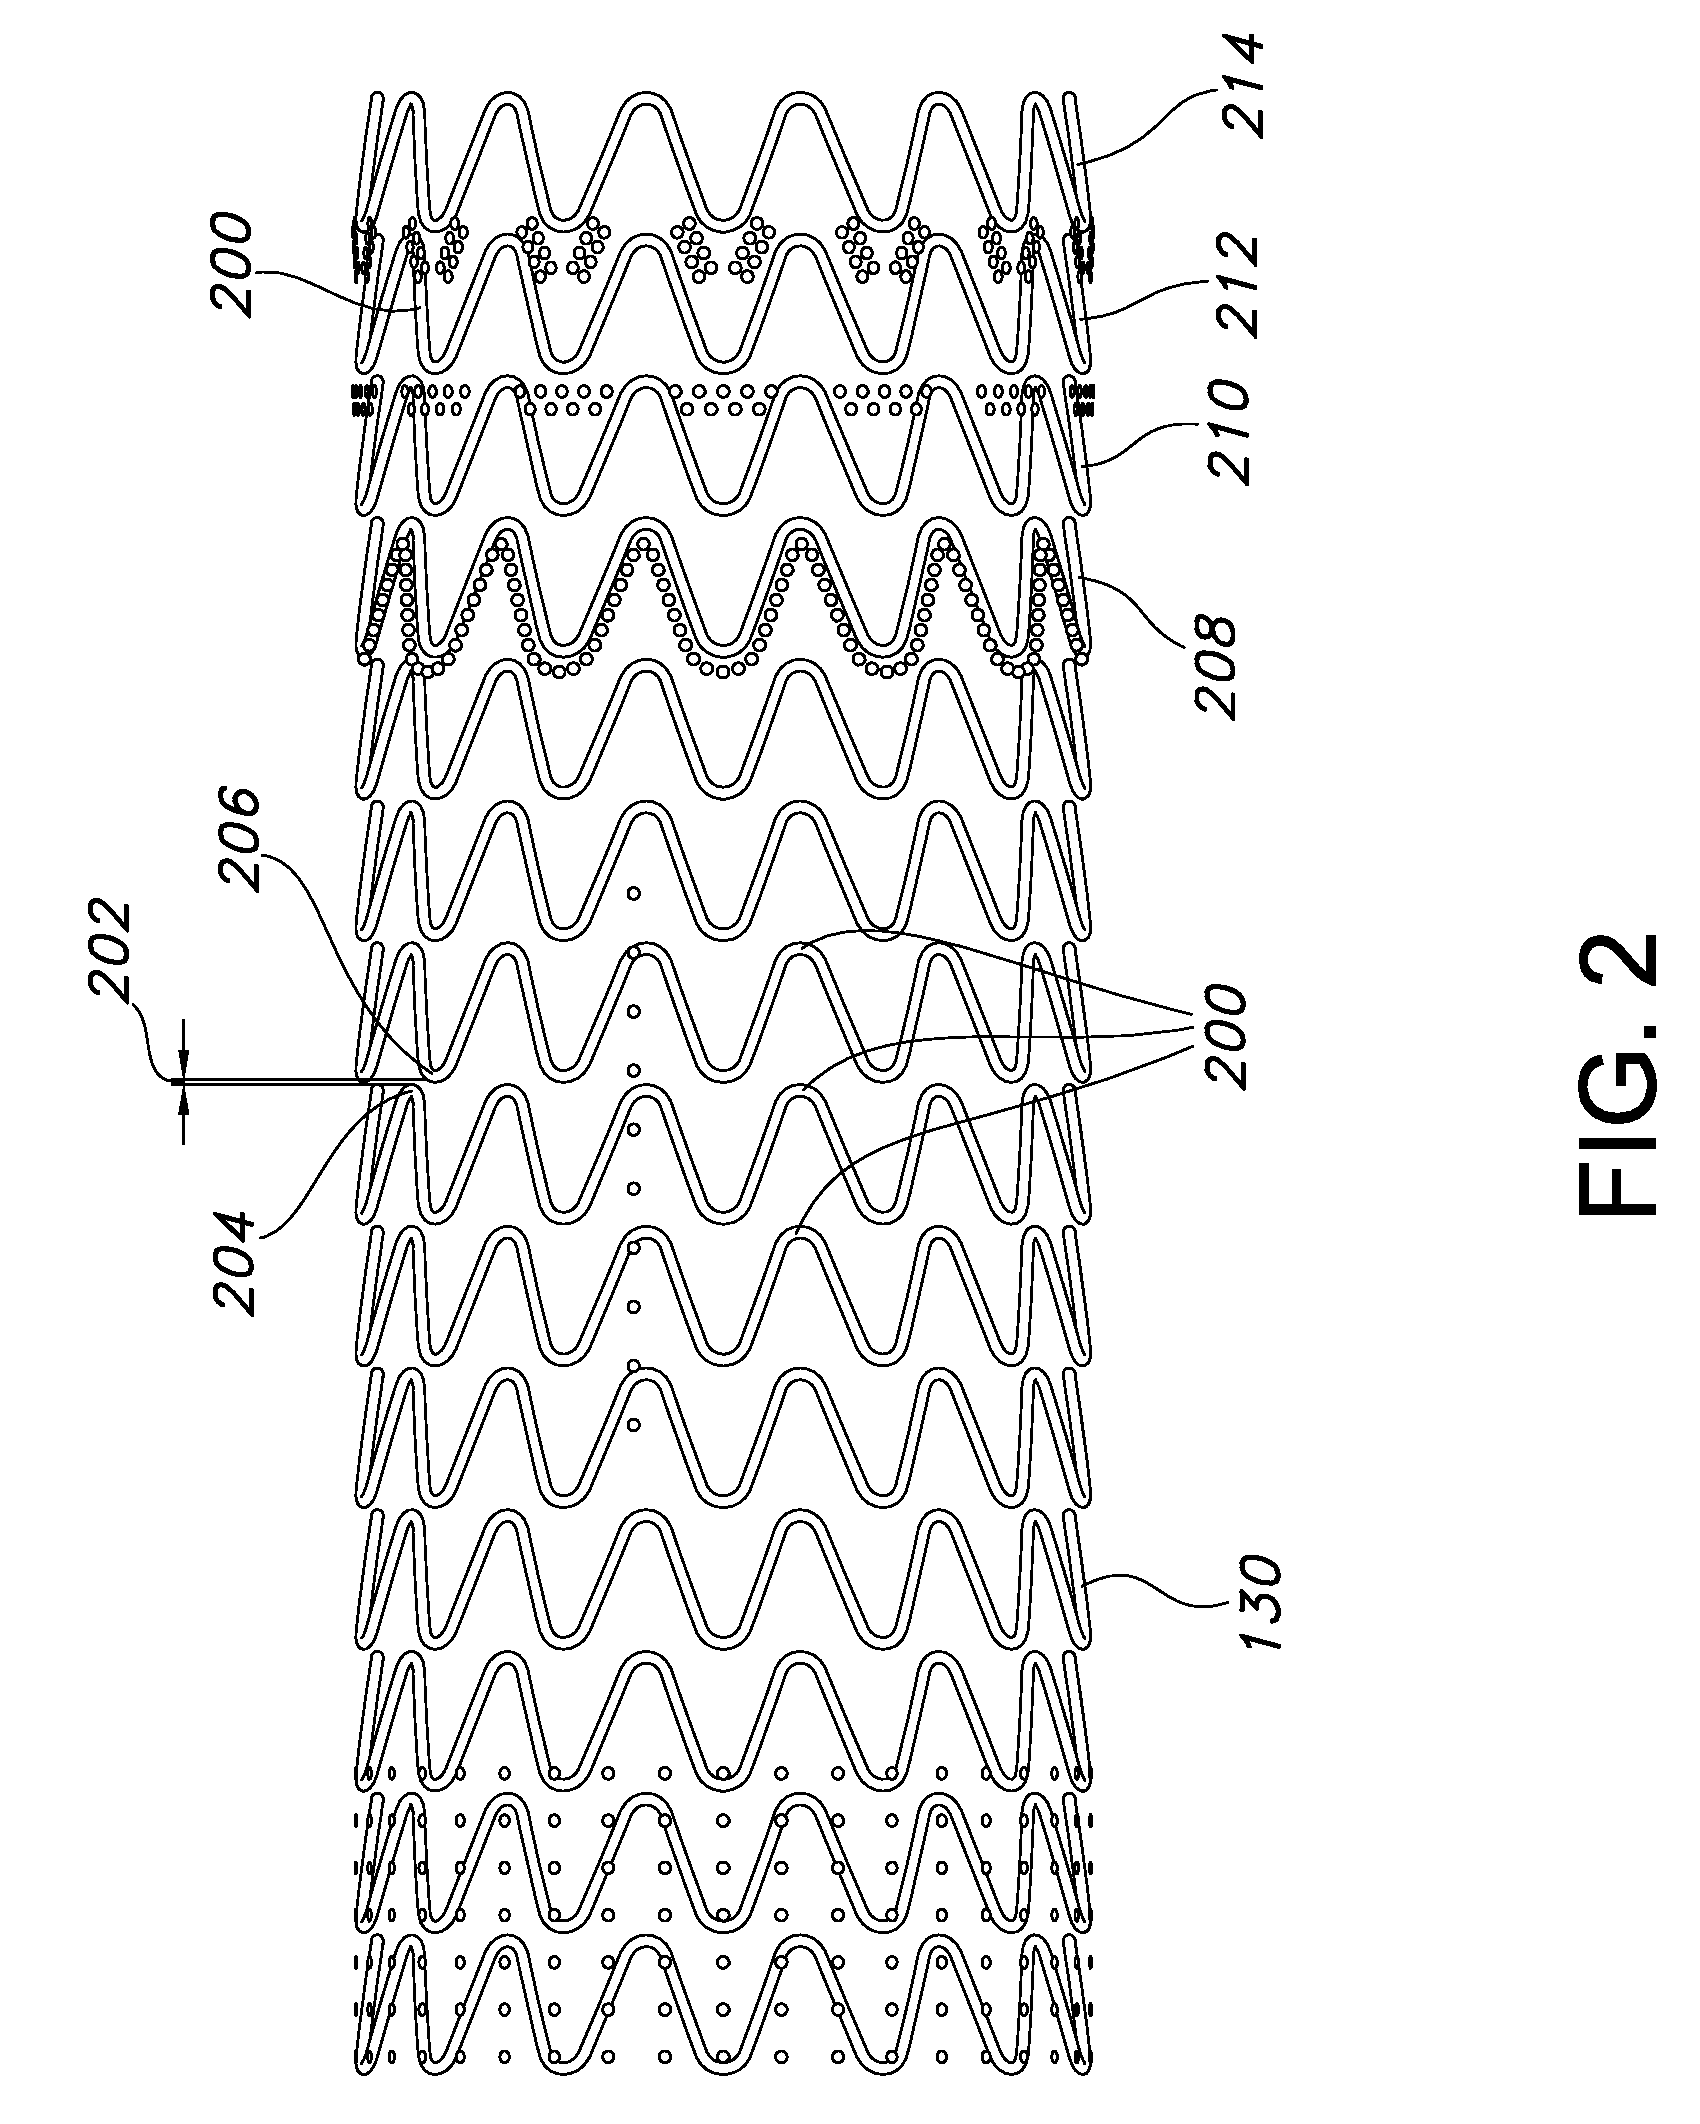 Flexible Stent-Graft Device Having Patterned Polymeric Coverings